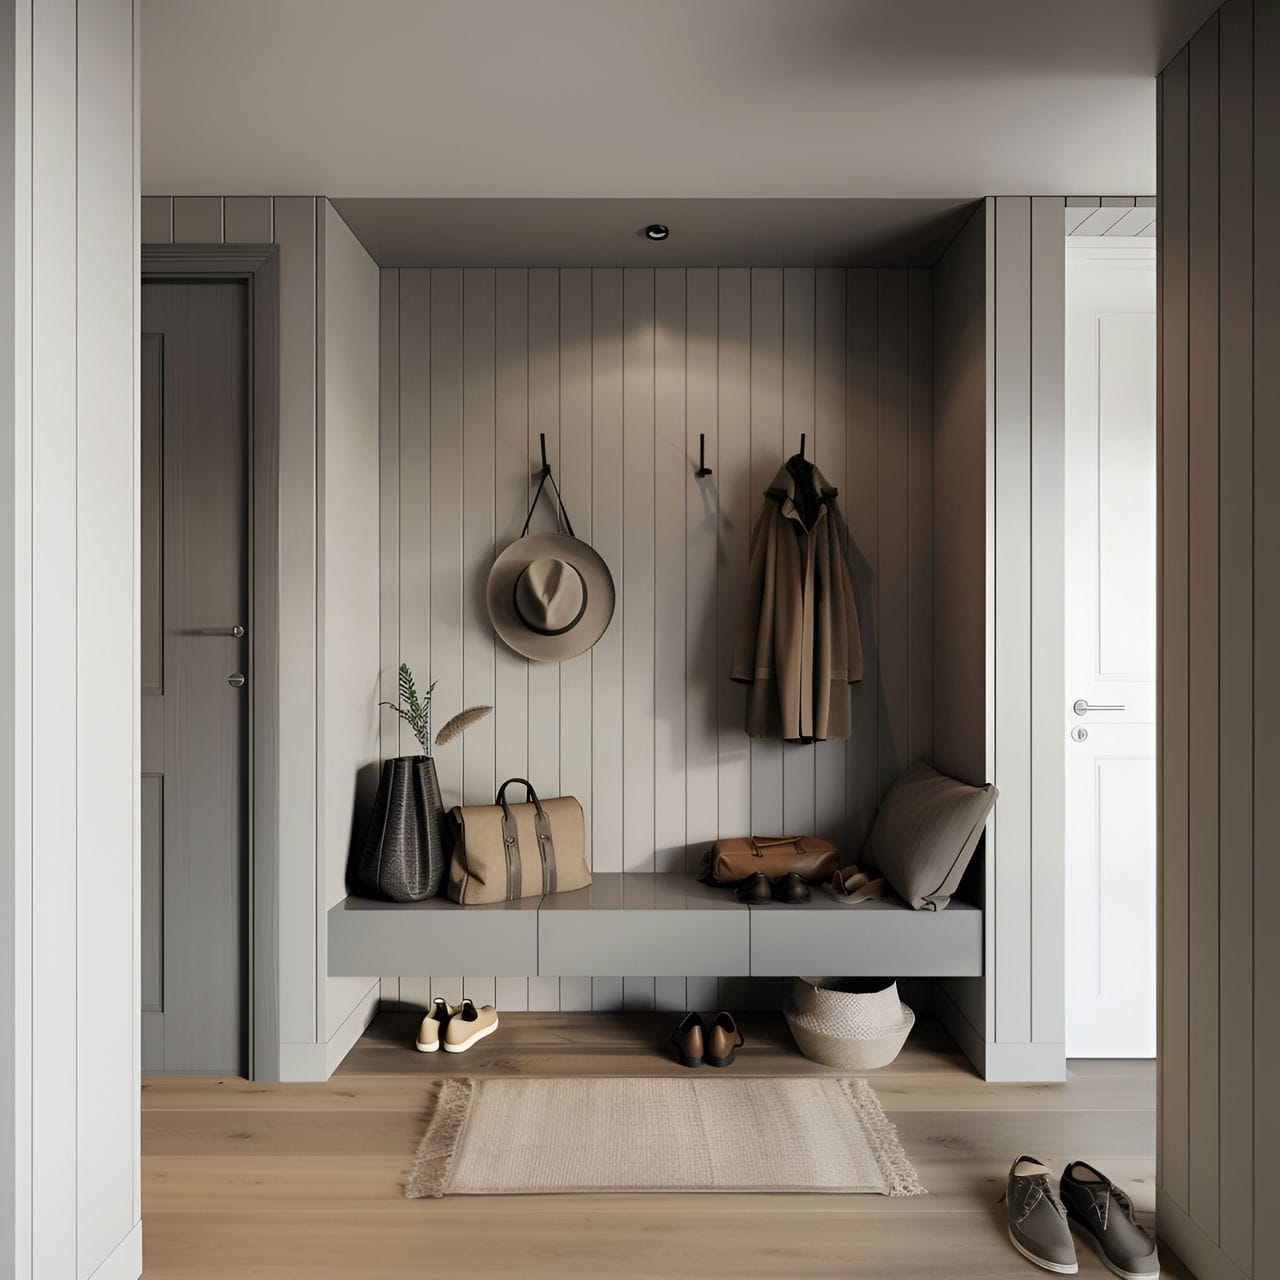 Mudroom: size, functionality, uses, furniture and renovation